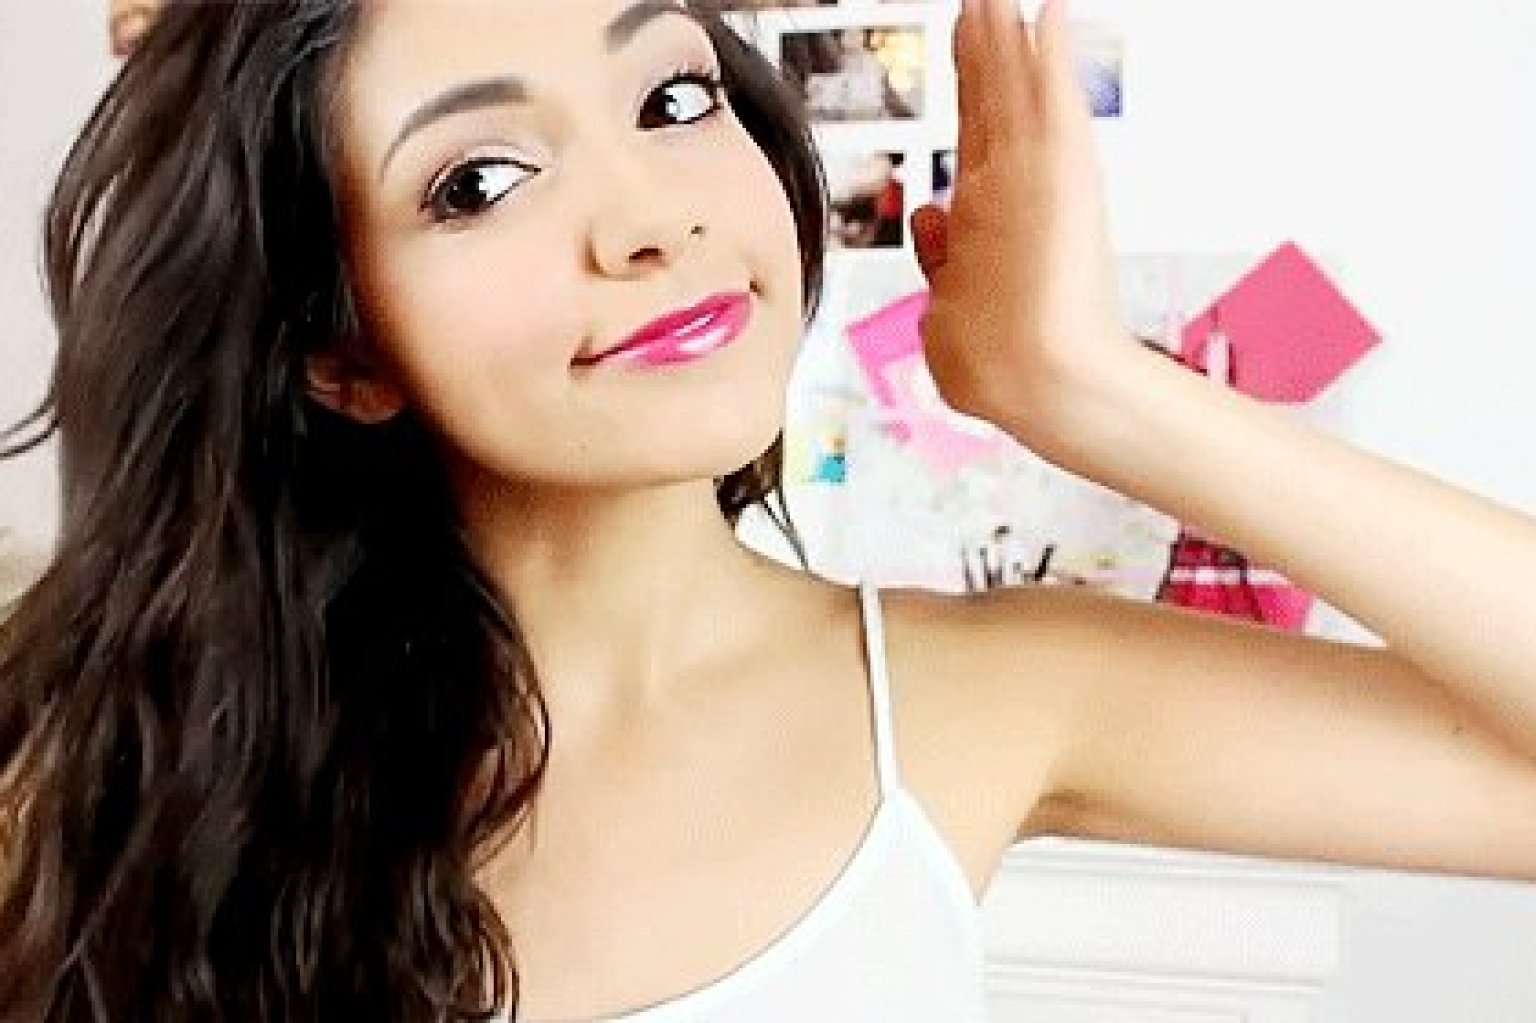 Teen Youtube Star Bethany Mota S Beauty Routine Is Good Enough For Grown Ups Video Huffpost